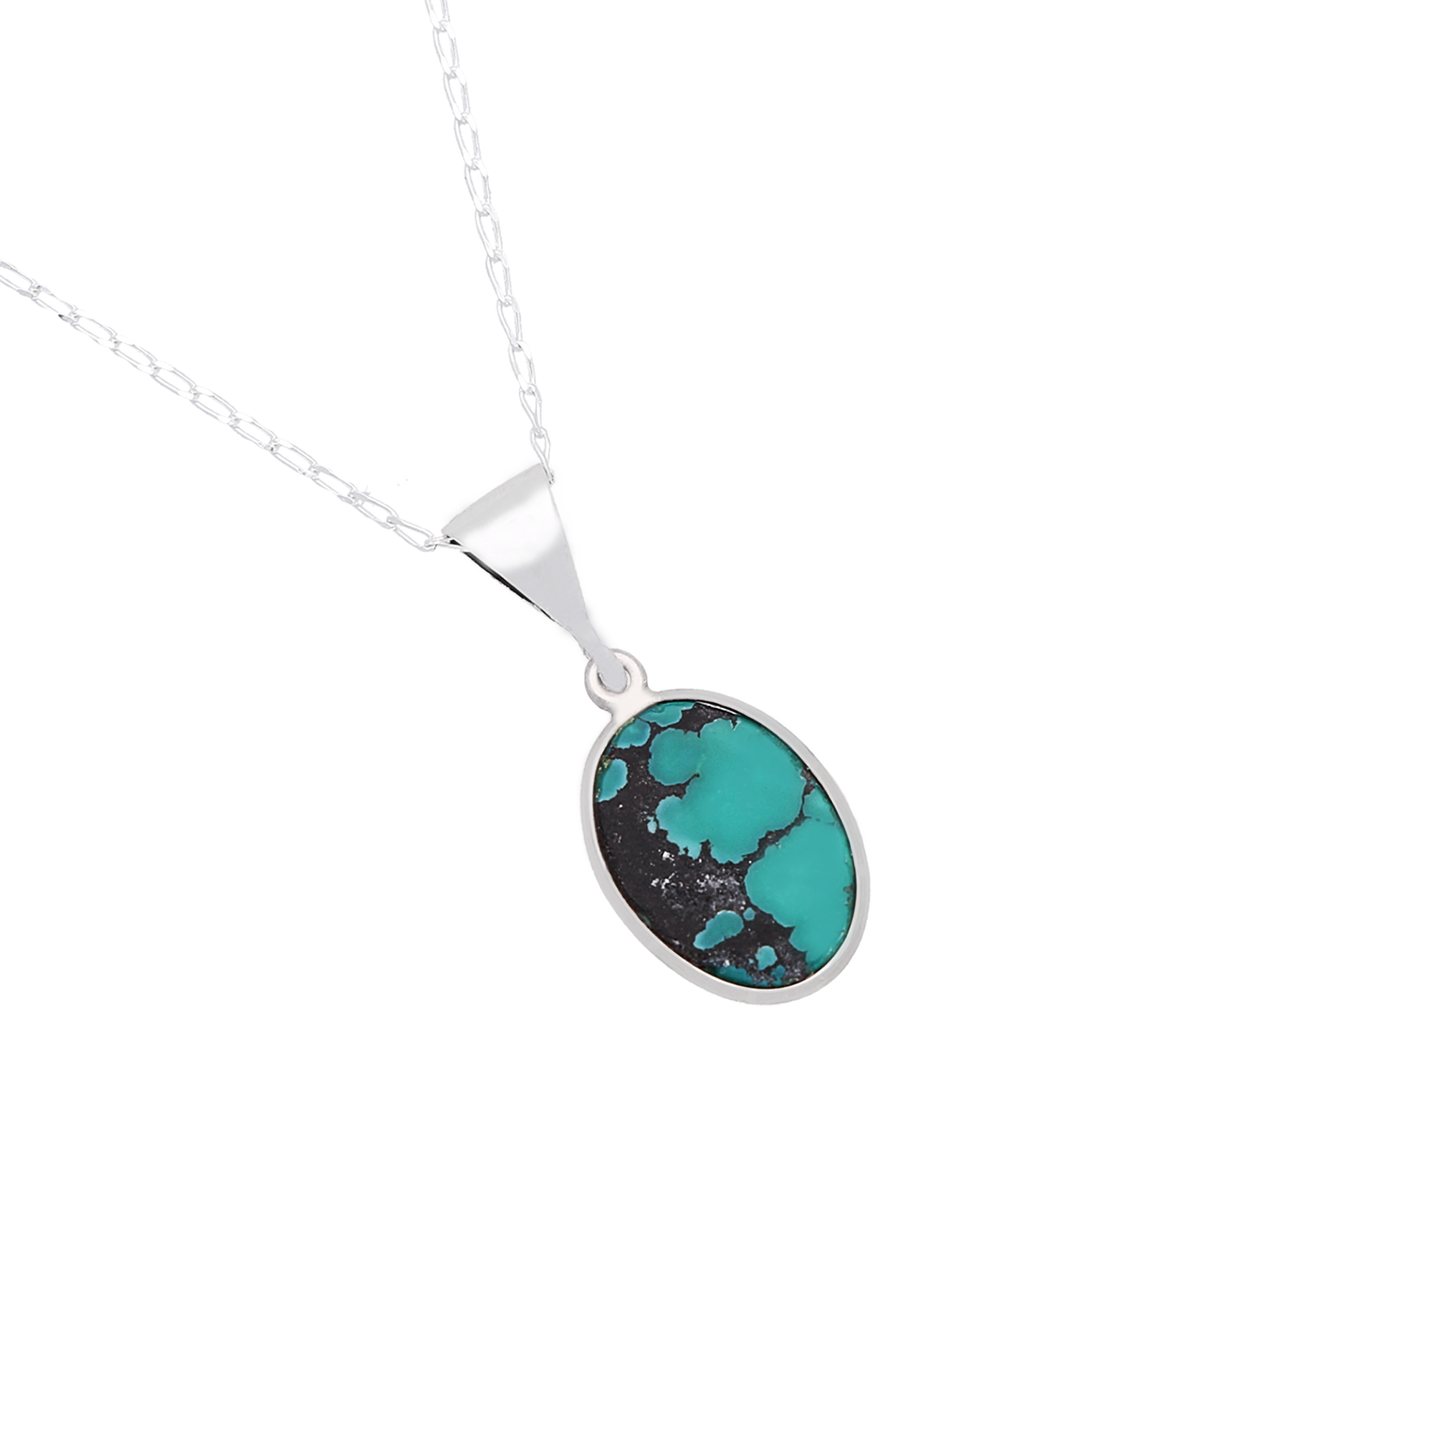 Small Oval Turquoise Pendant